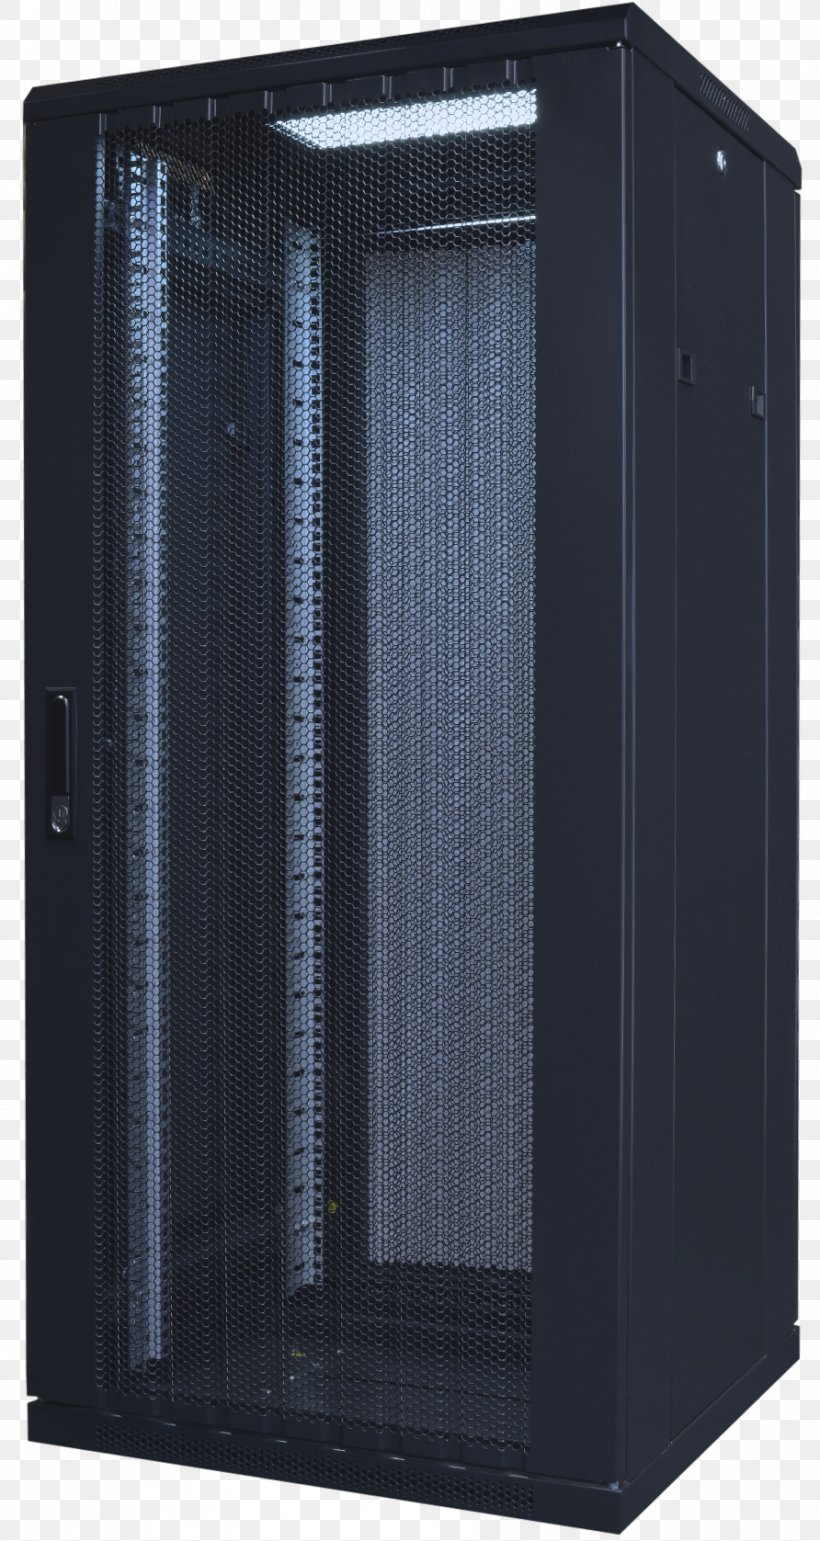 Computer Cases & Housings Sound Box Computer Servers, PNG, 892x1677px, Computer Cases Housings, Audio, Computer, Computer Case, Computer Servers Download Free